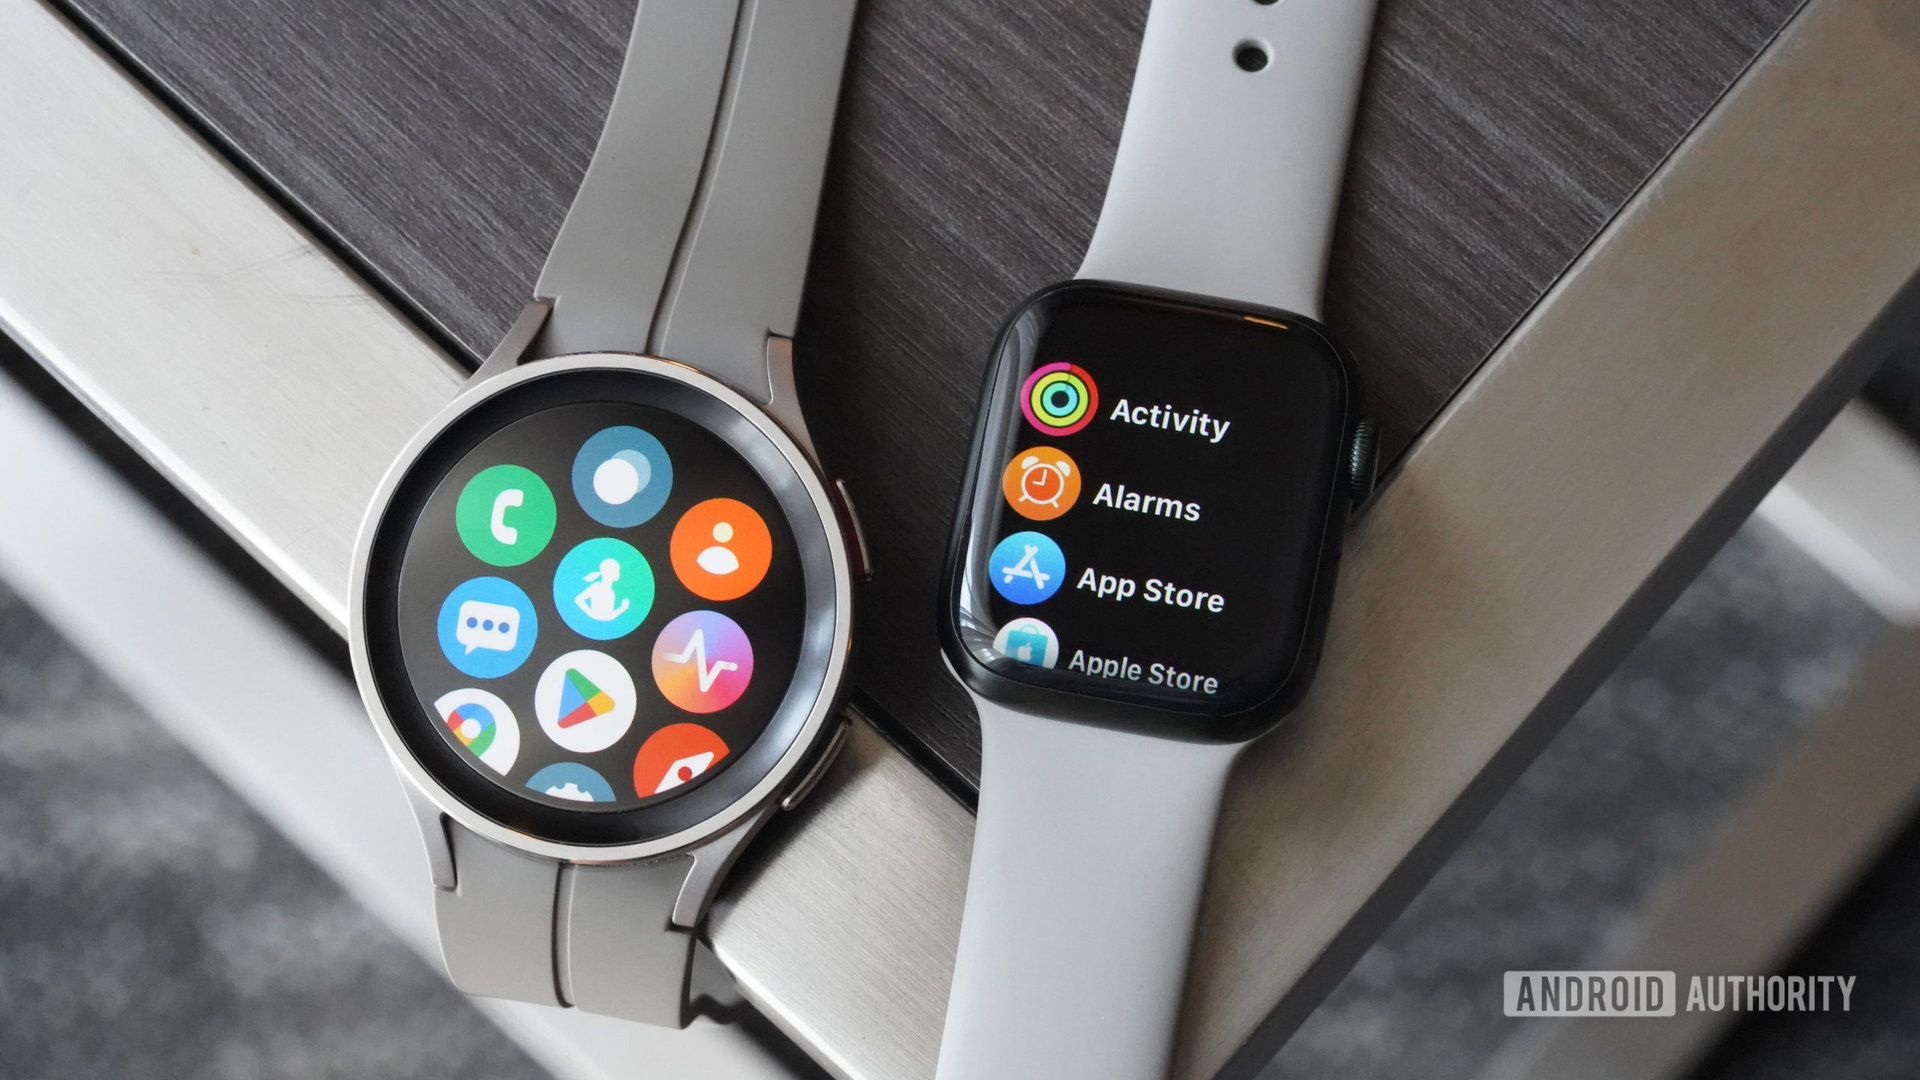 An Apple Watch Series 7 and a Galaxy Watch 5 Pro rest side by side on a metallic table.